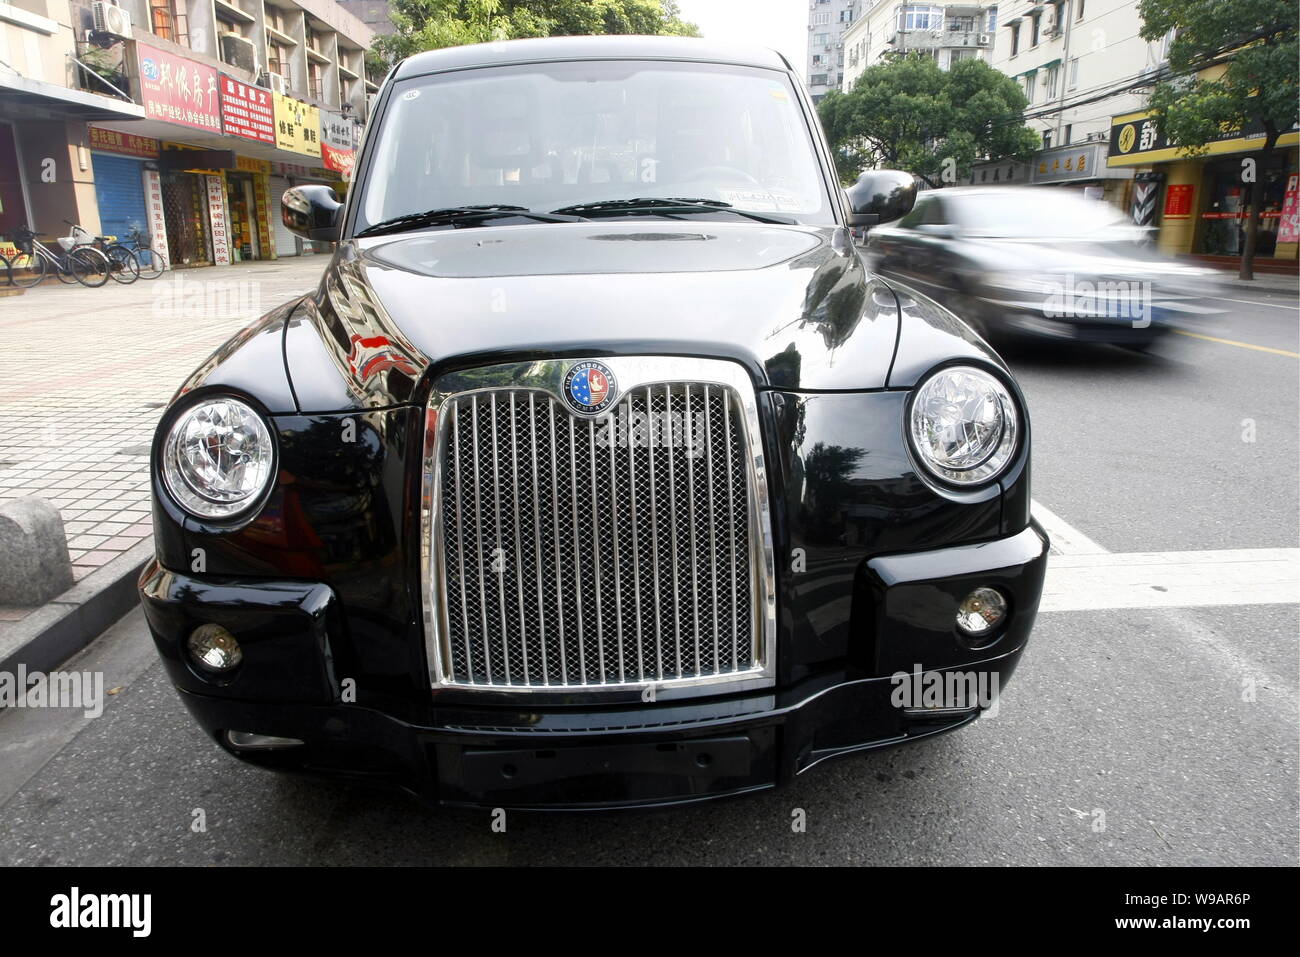 A Geely TX4 is seen in a street in Shanghai, China, July 21, 2010.   Manganese Bronze Holdings Plc, maker of the iconic London black cab, wanted to ti Stock Photo